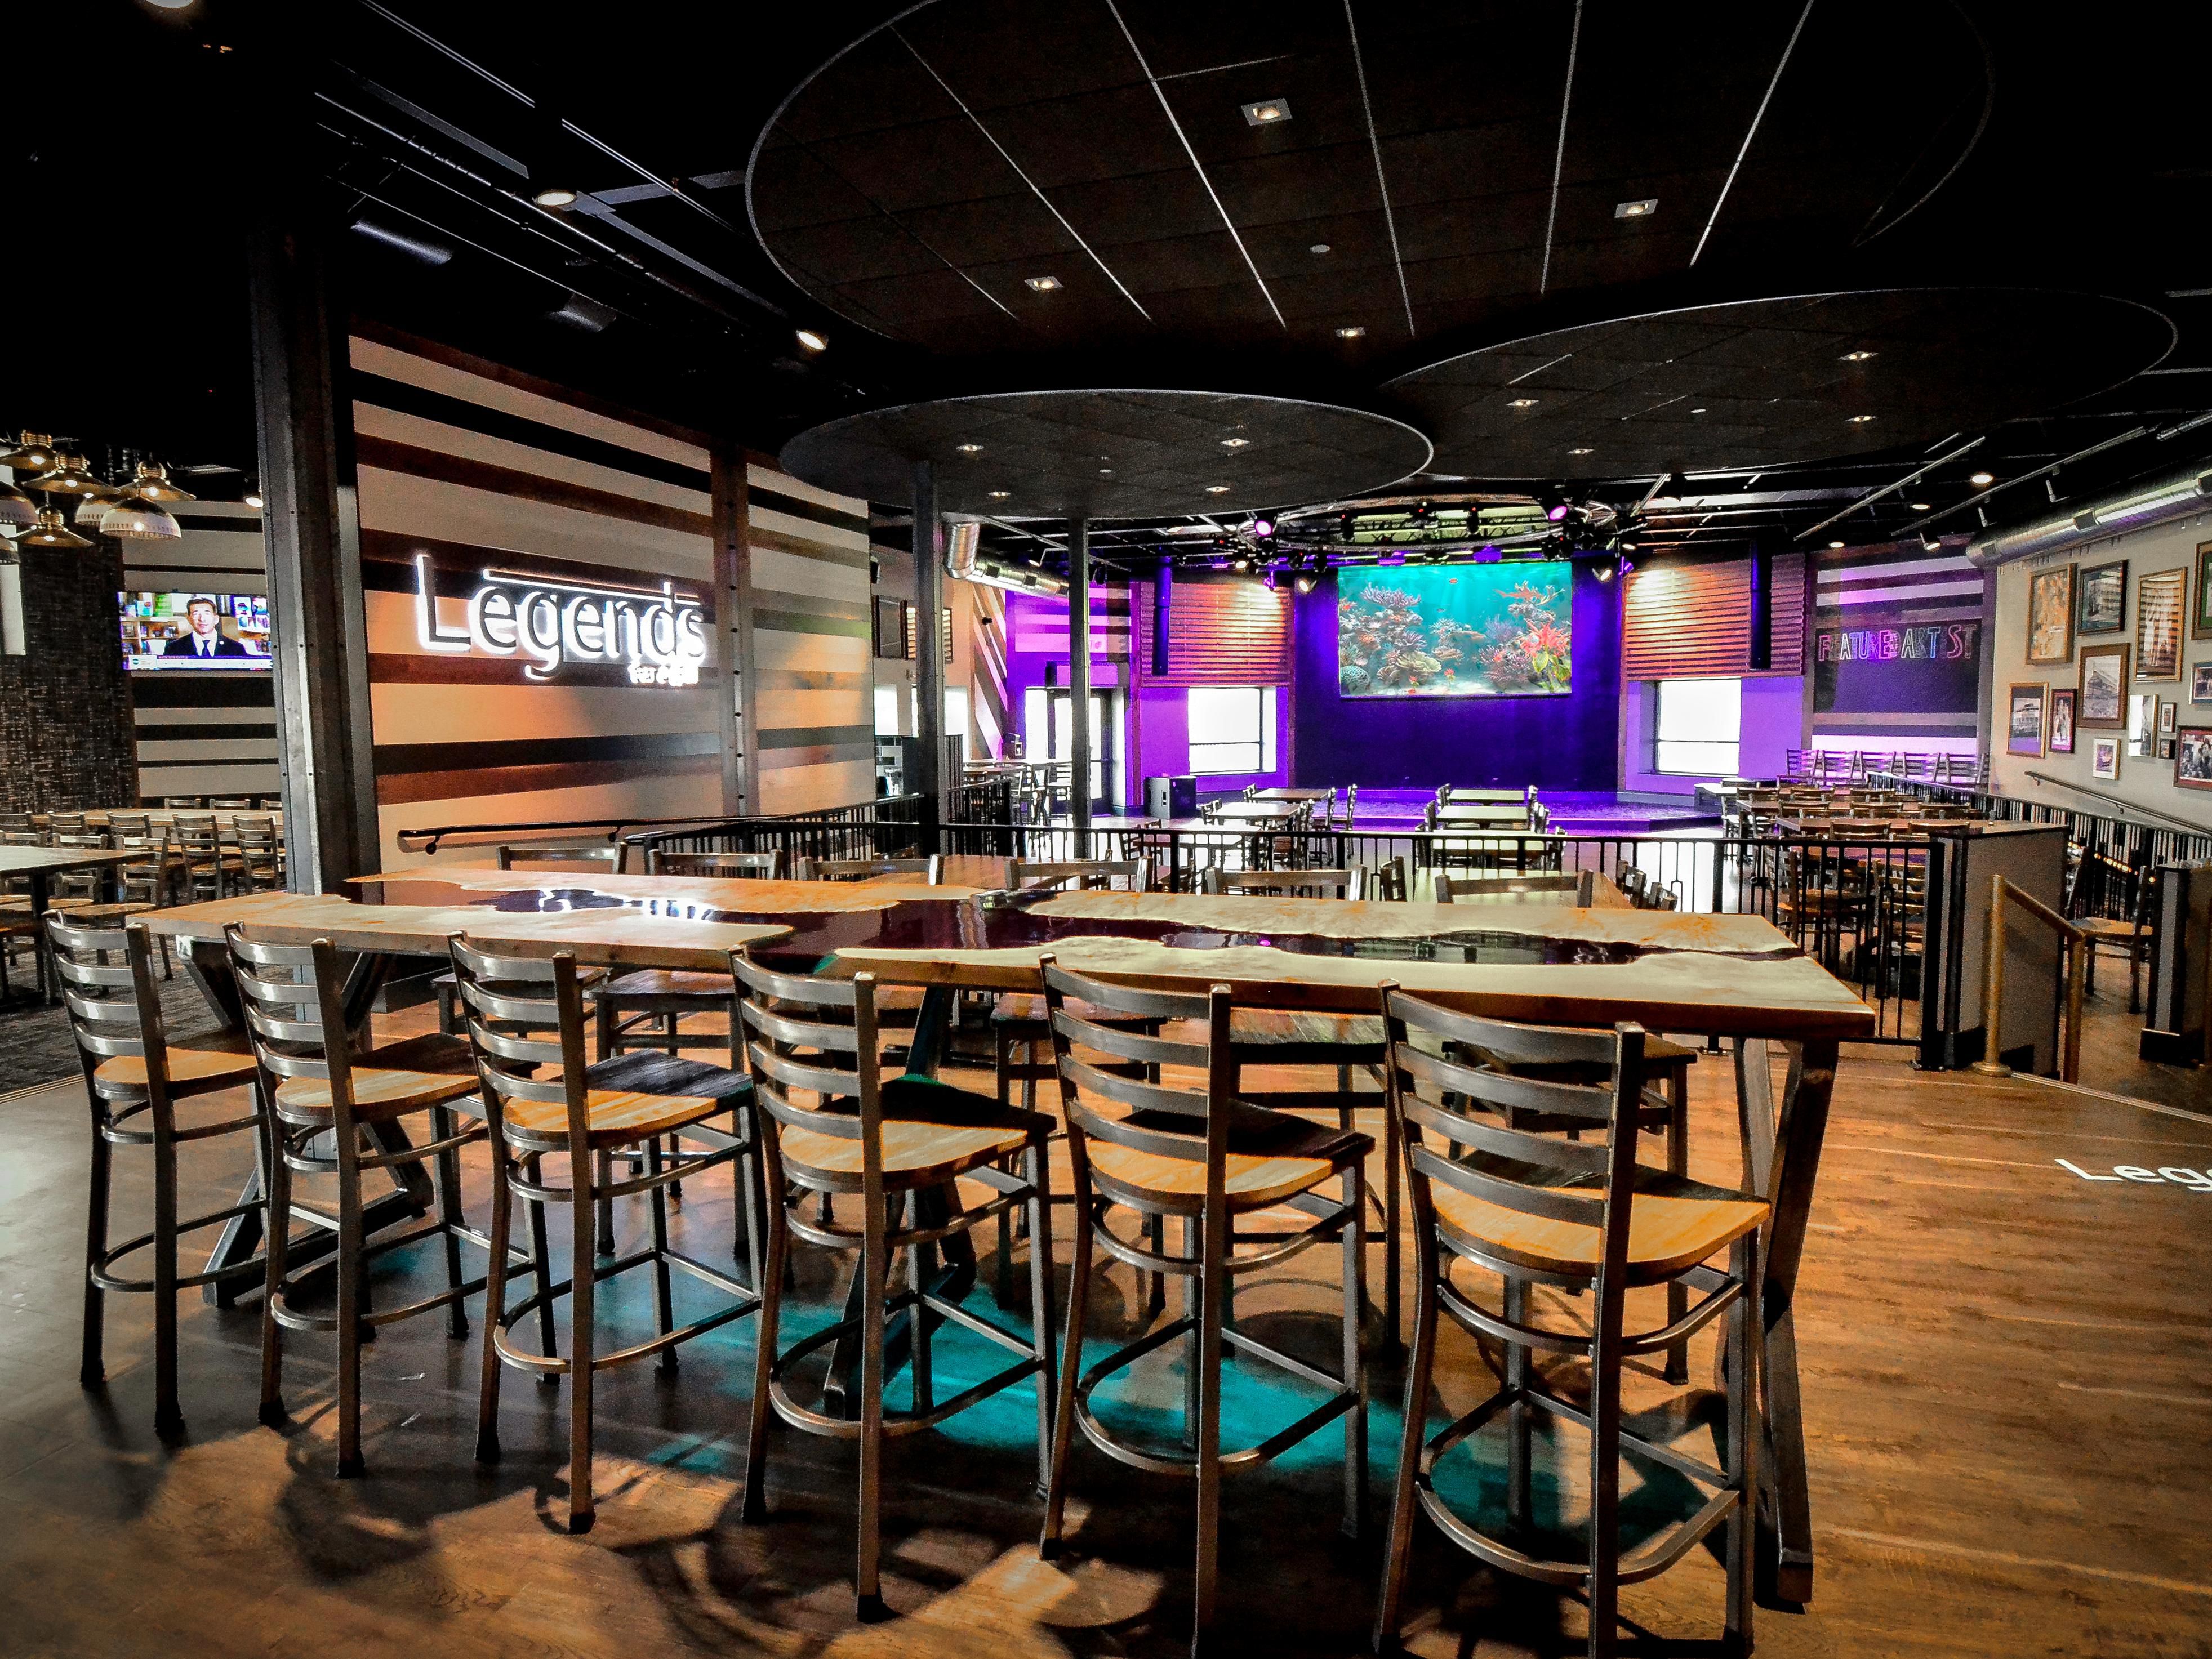 Be Your Own Legend at Legend's Bar and Grill. Now open for breakfast, lunch, and dinner. Come on by the new restaurant and check out our new menu and get ready to dance to live bands and entertainment weekly. Private dining is also available. 